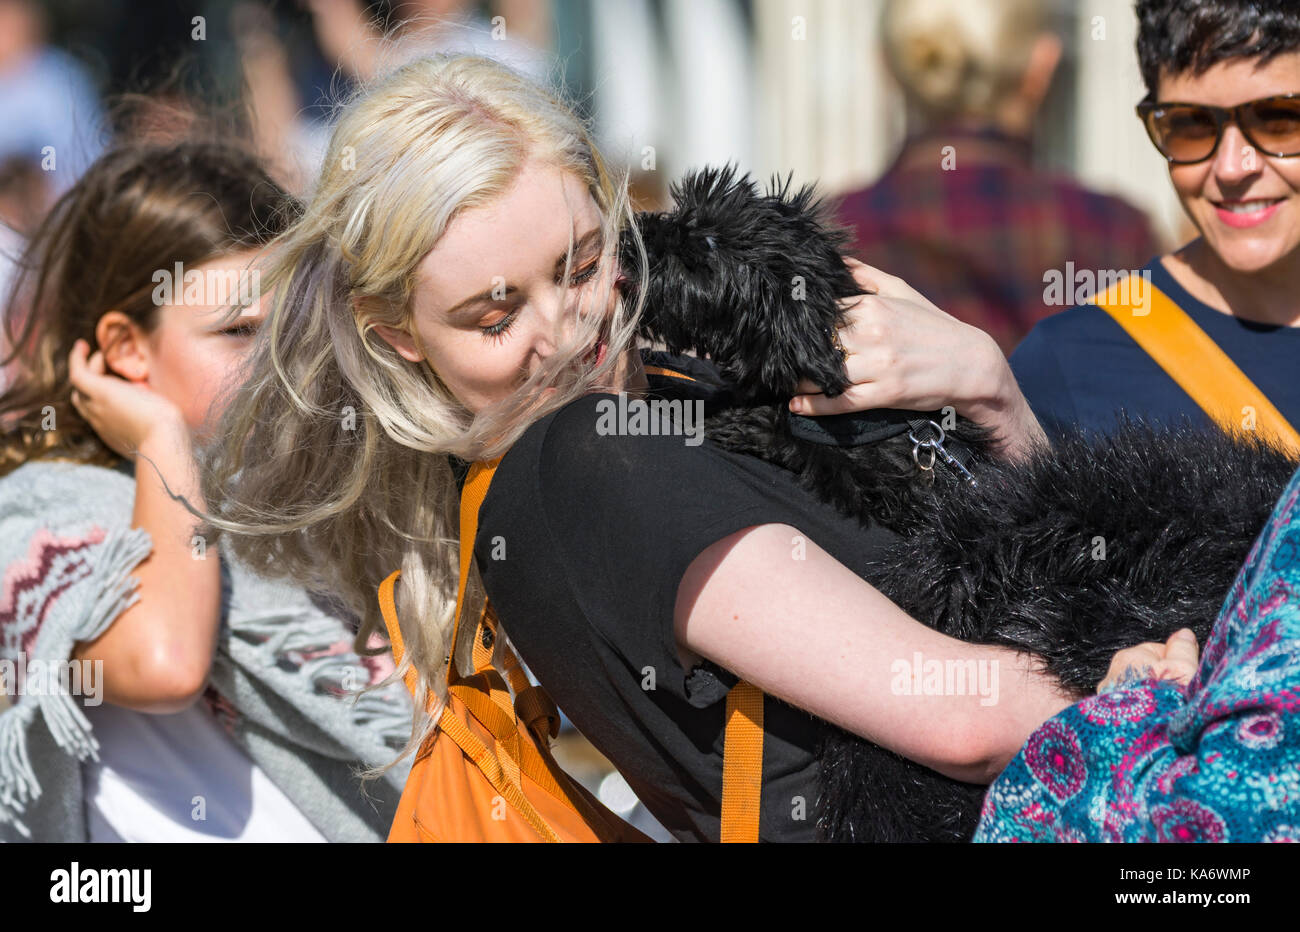 Pretty young woman cuddling a dog while it licks her face to show affection. Stock Photo